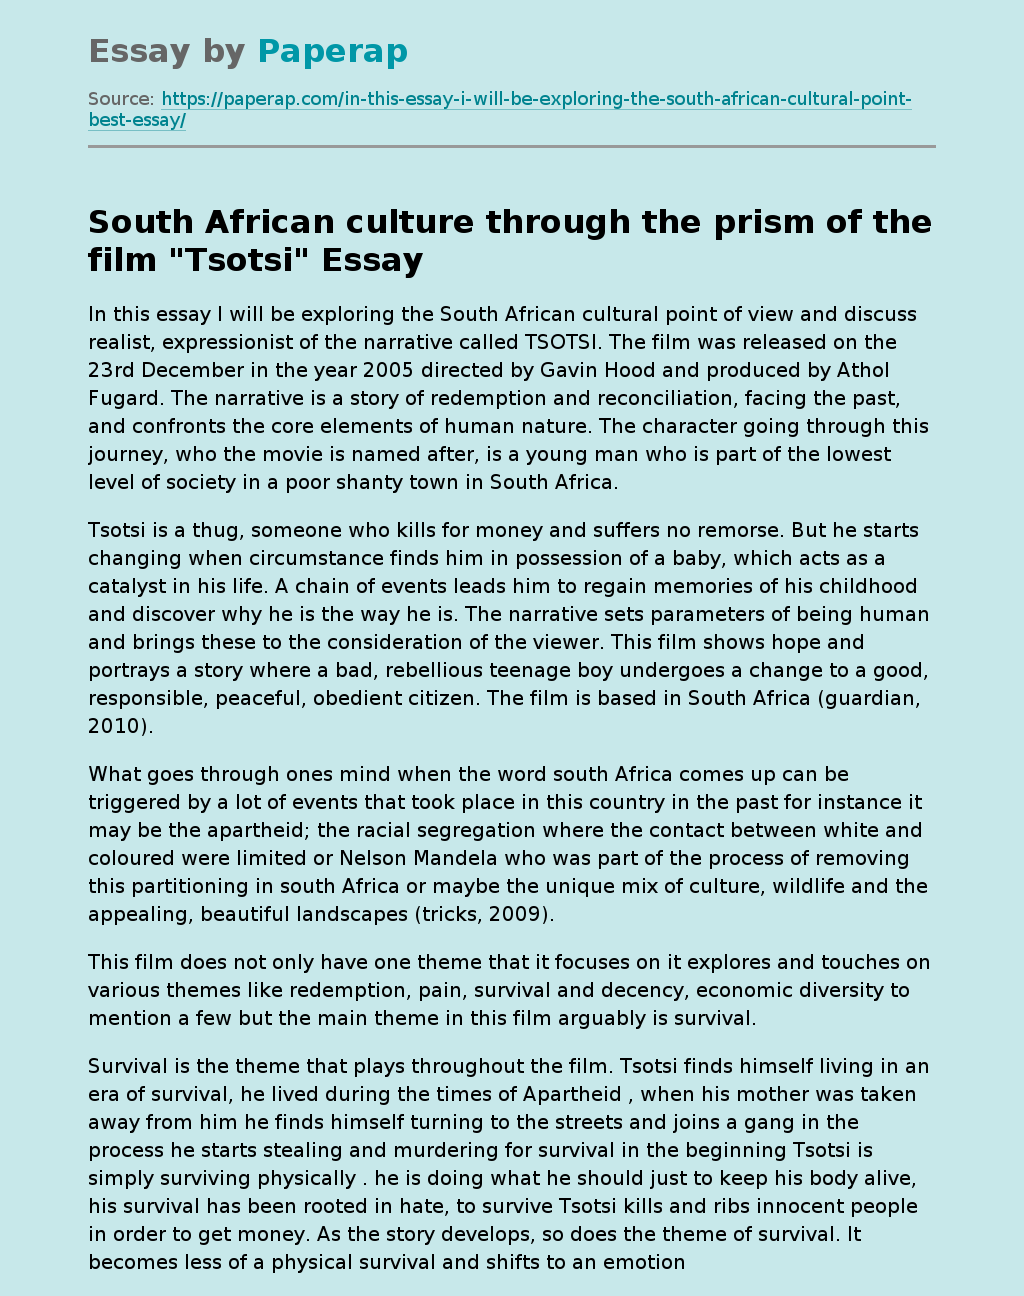 South African culture through the prism of the film "Tsotsi"